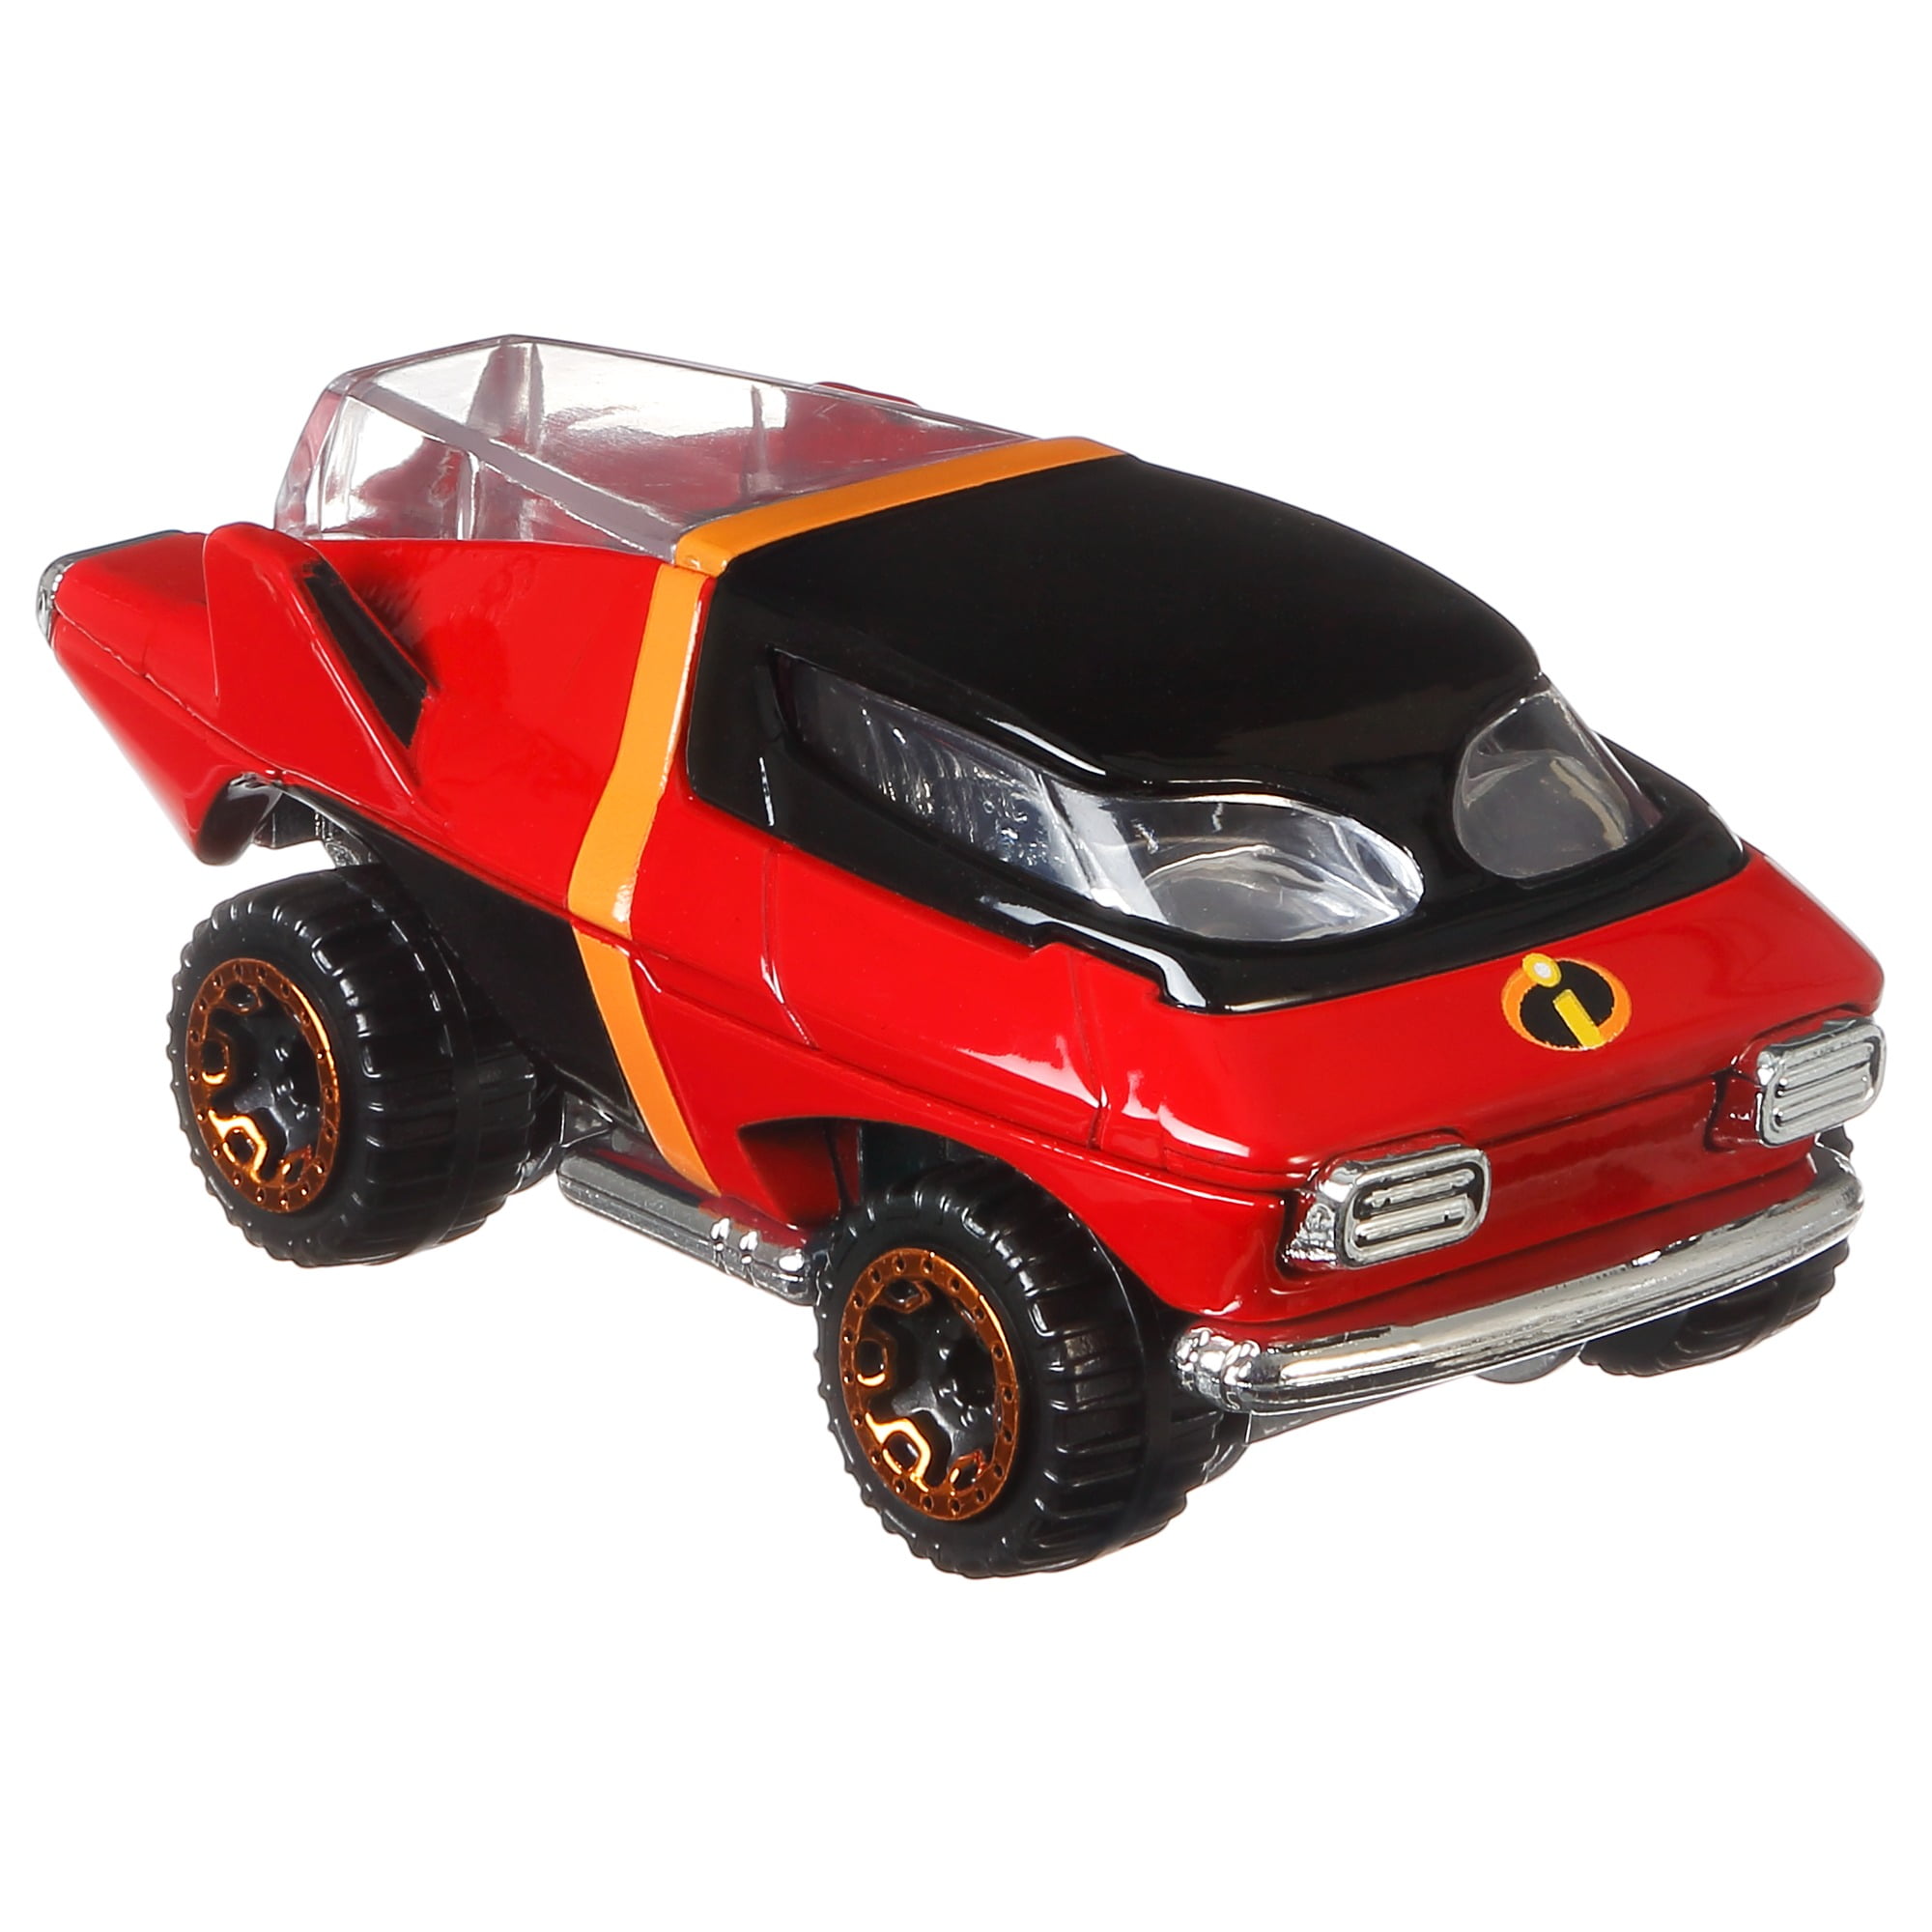 Details about   Hot Wheels DISNEY PIXAR Character Cars JACK-JACK Wreck-It Ralph The Incredibles 